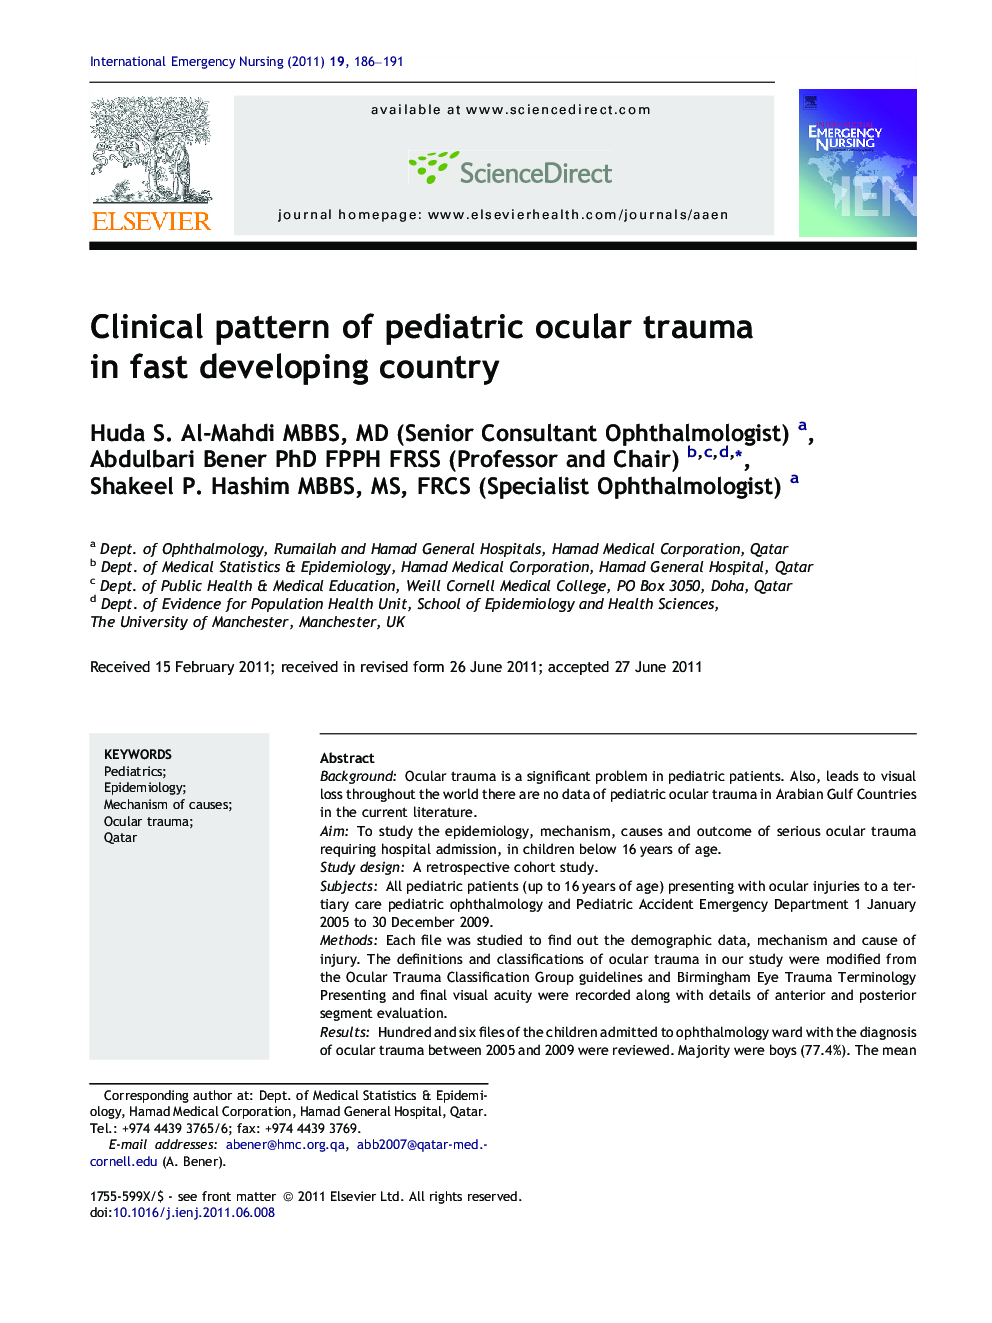 Clinical pattern of pediatric ocular trauma in fast developing country